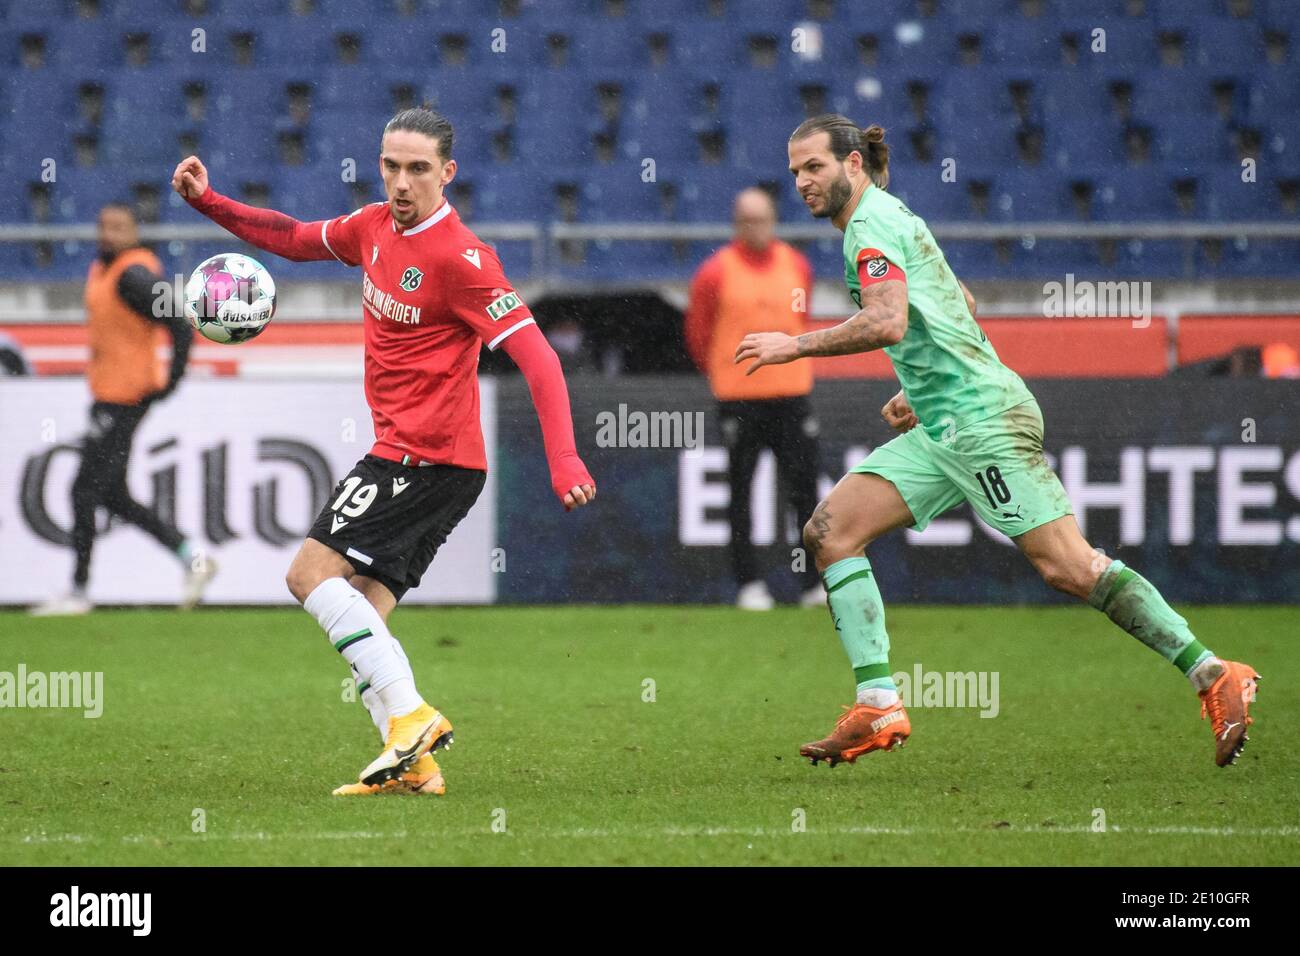 Hanover, Germany. 03rd Jan, 2021. Football: 2. Bundesliga, Hannover 96 - SV Sandhausen, Matchday 14 at HDI Arena. Hannover's Valmir Sulejmani (l) plays against Sandhausen's Dennis Diekmeier. Credit: Swen Pförtner/dpa - IMPORTANT NOTE: In accordance with the regulations of the DFL Deutsche Fußball Liga and/or the DFB Deutscher Fußball-Bund, it is prohibited to use or have used photographs taken in the stadium and/or of the match in the form of sequence pictures and/or video-like photo series./dpa/Alamy Live News Stock Photo